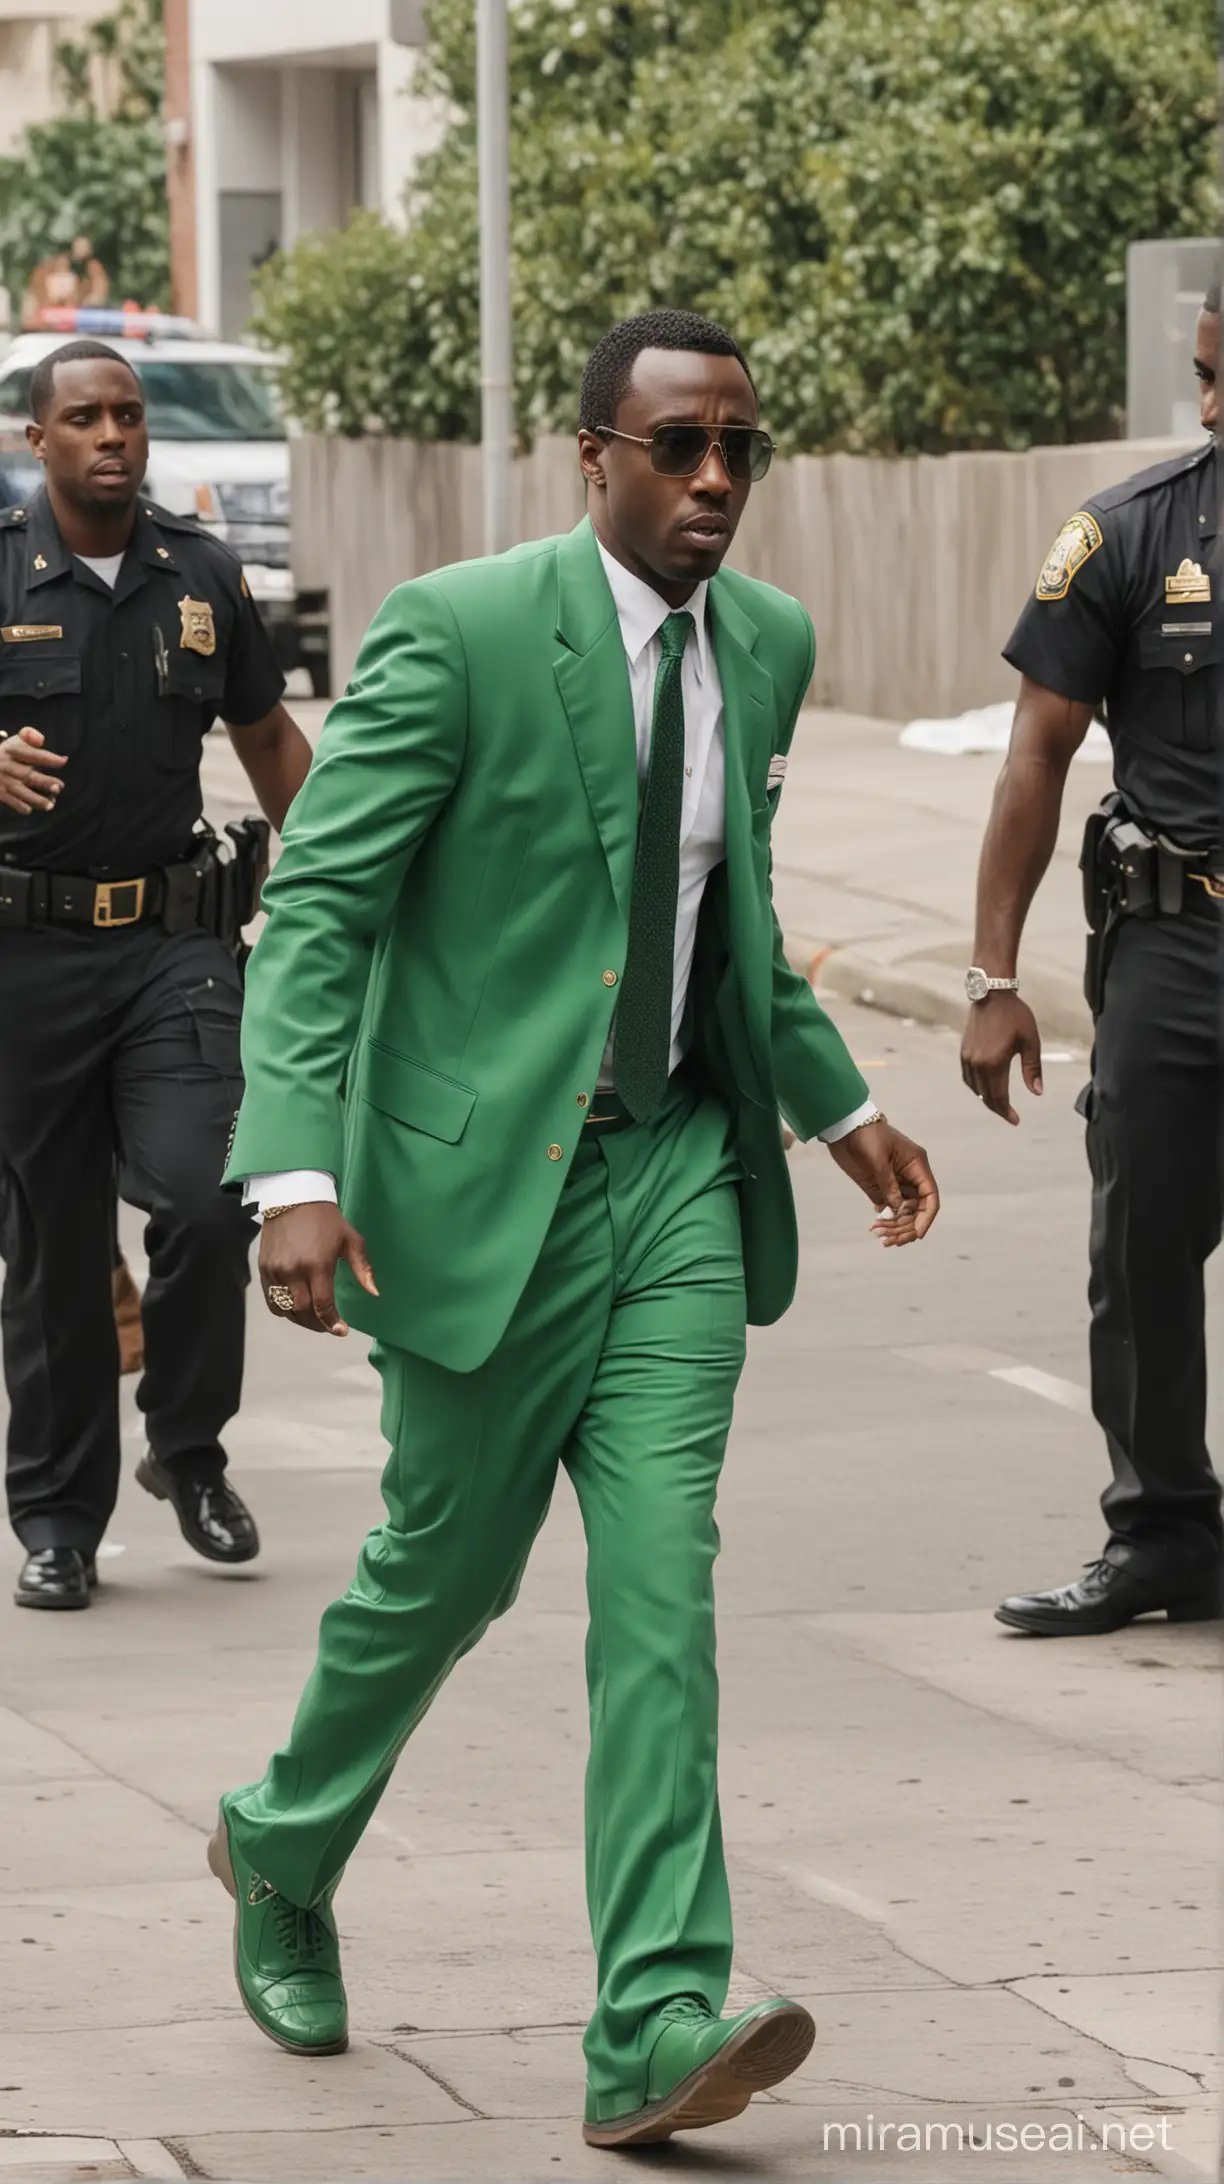 Puff daddy running from the cops in an all green suit